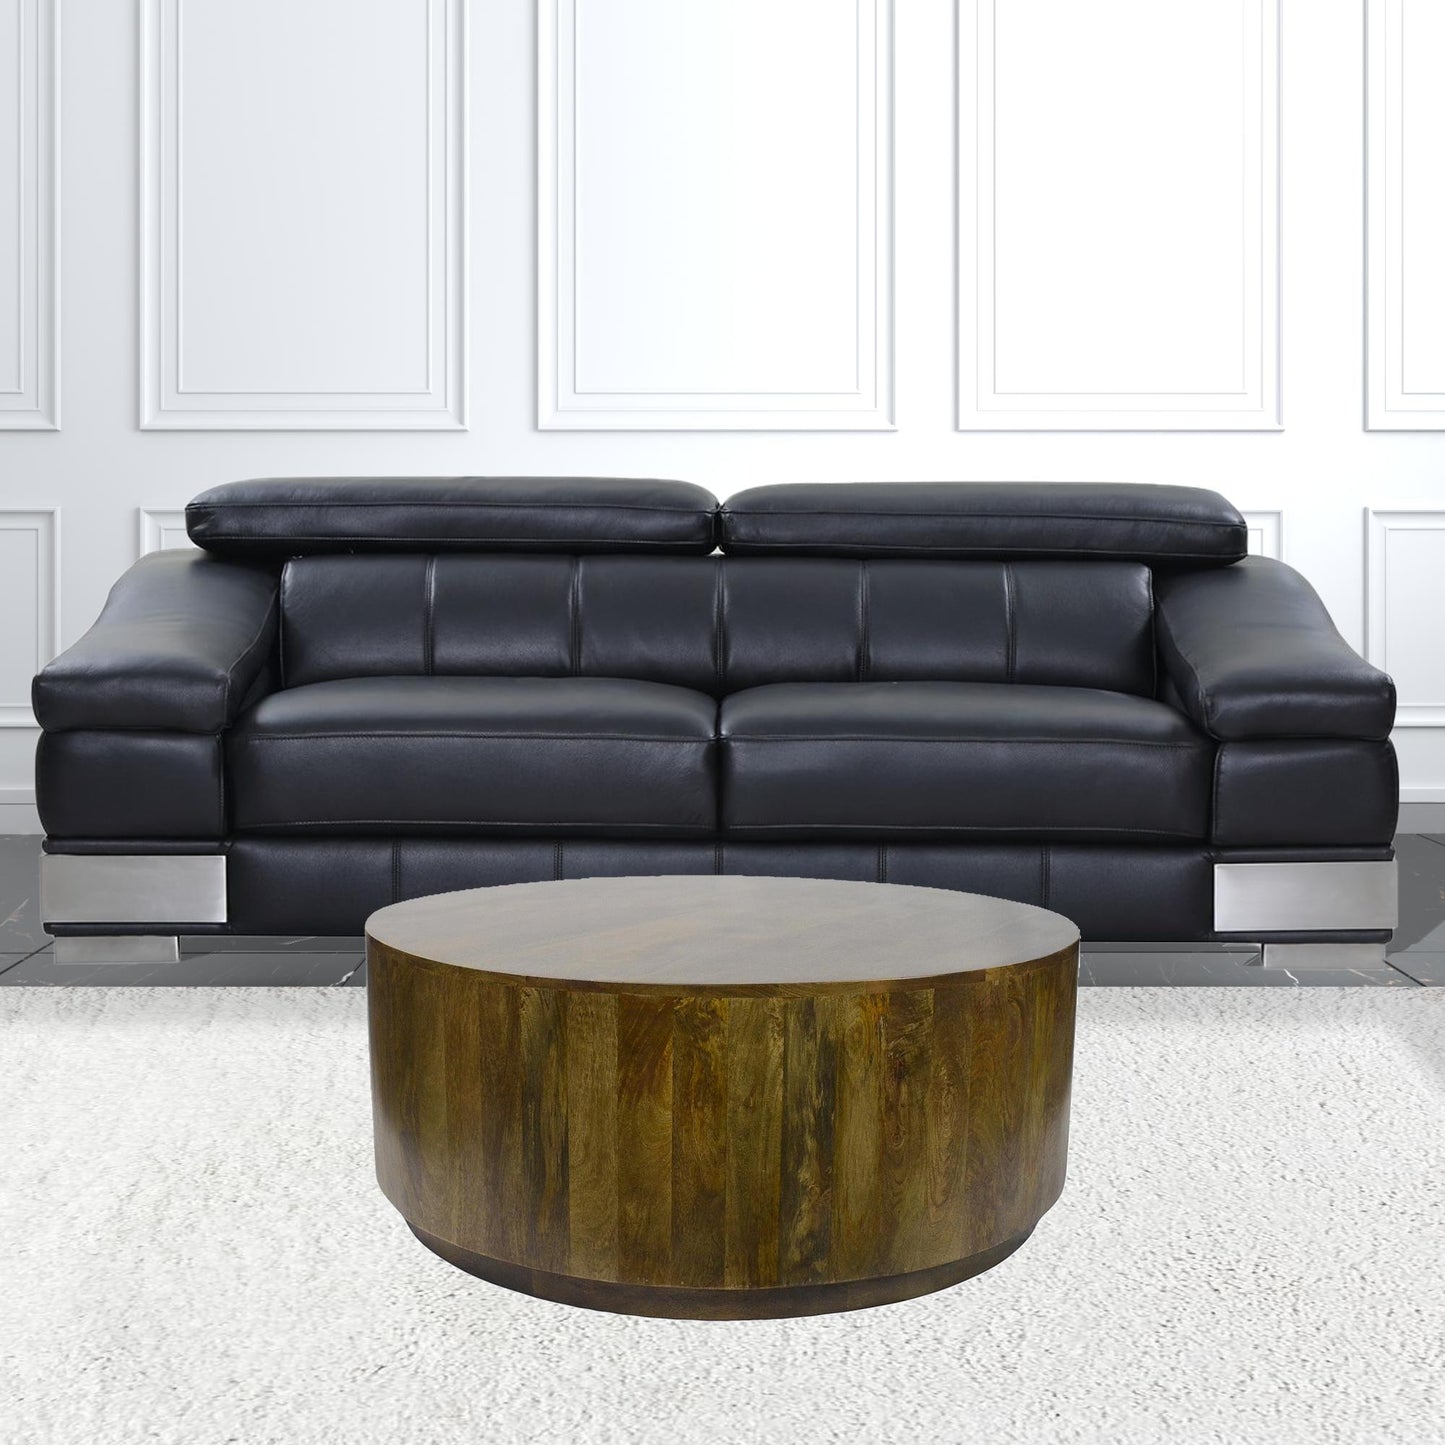 42" Rustic Brown Solid Wood Round Distressed Coffee Table